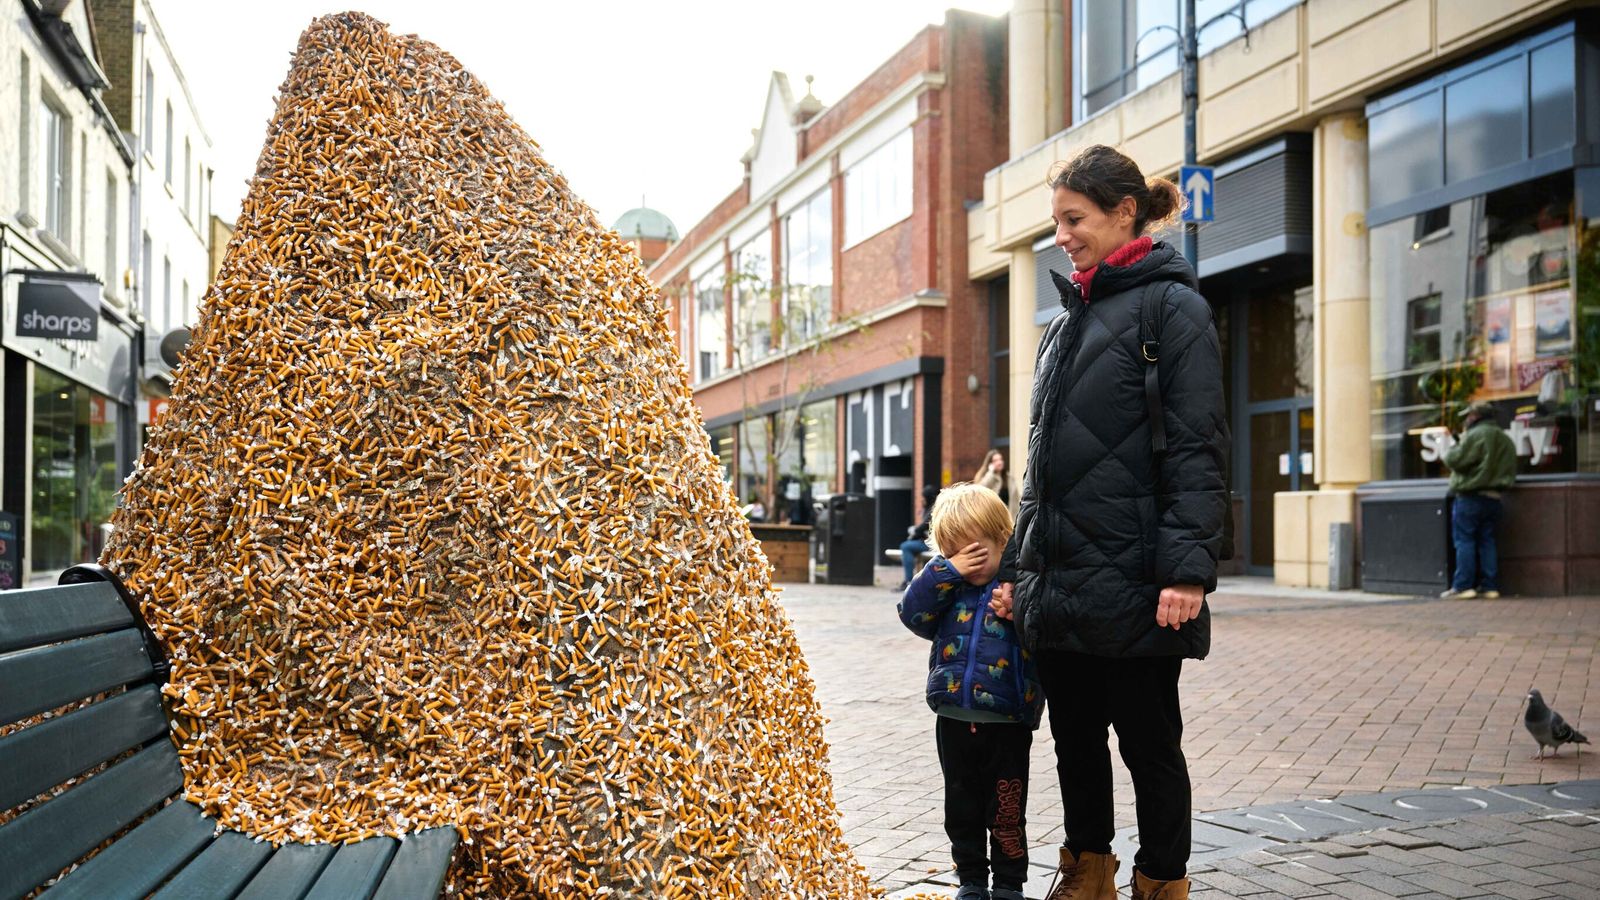 Mountain of cigarette butts dumped on high street to encourage smokers to stop dropping stubs